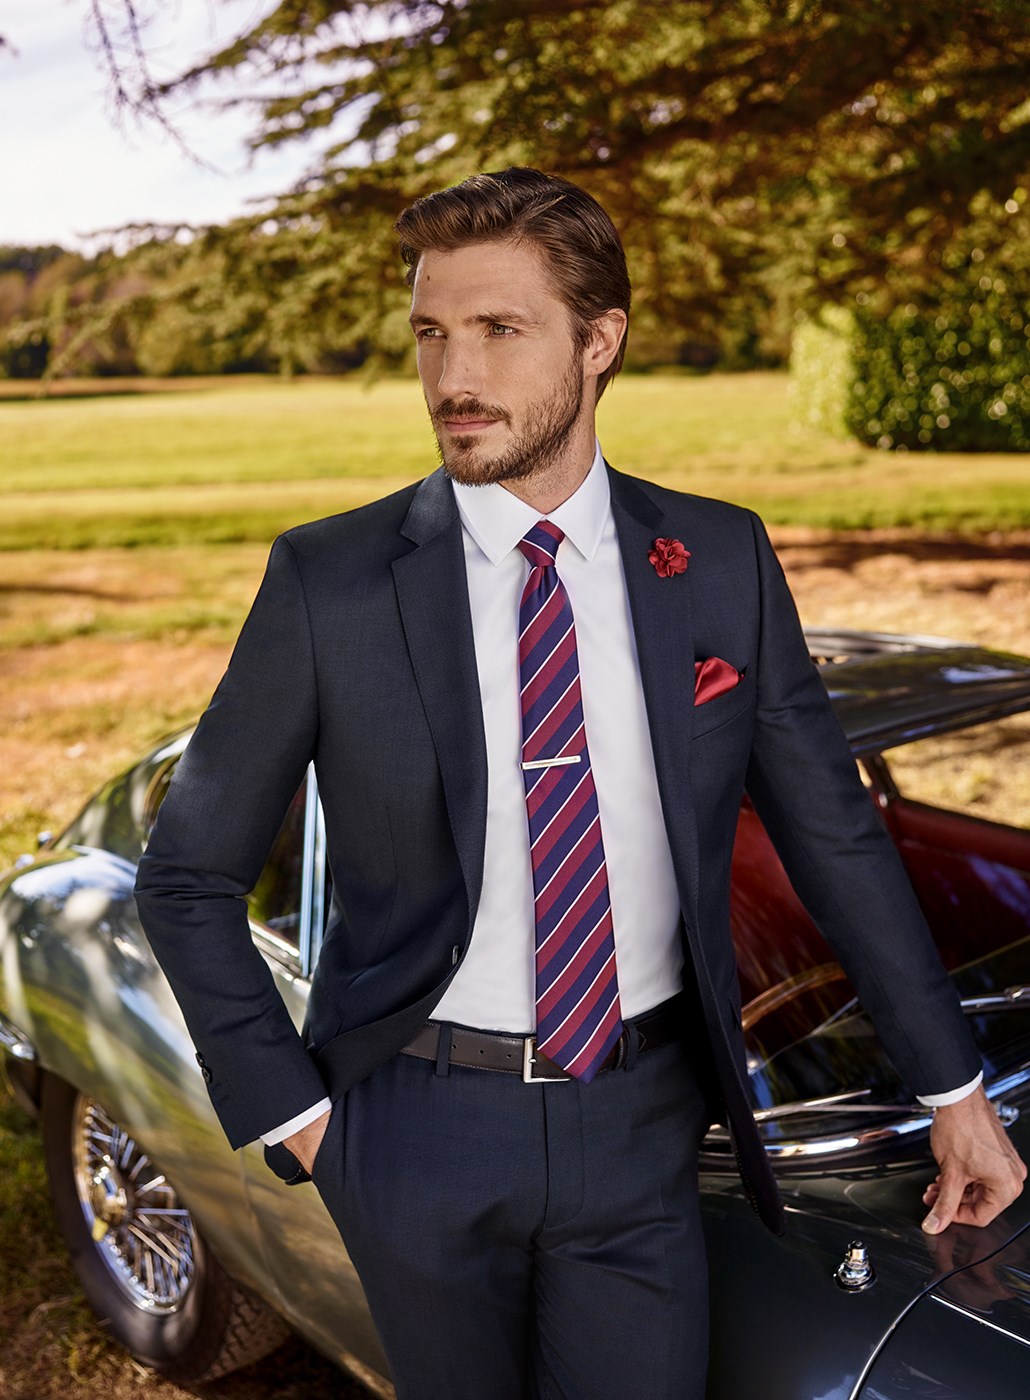 HOW TO BUILD A PROFESSIONAL WARDROBE FOR MEN – The Helm Clothing